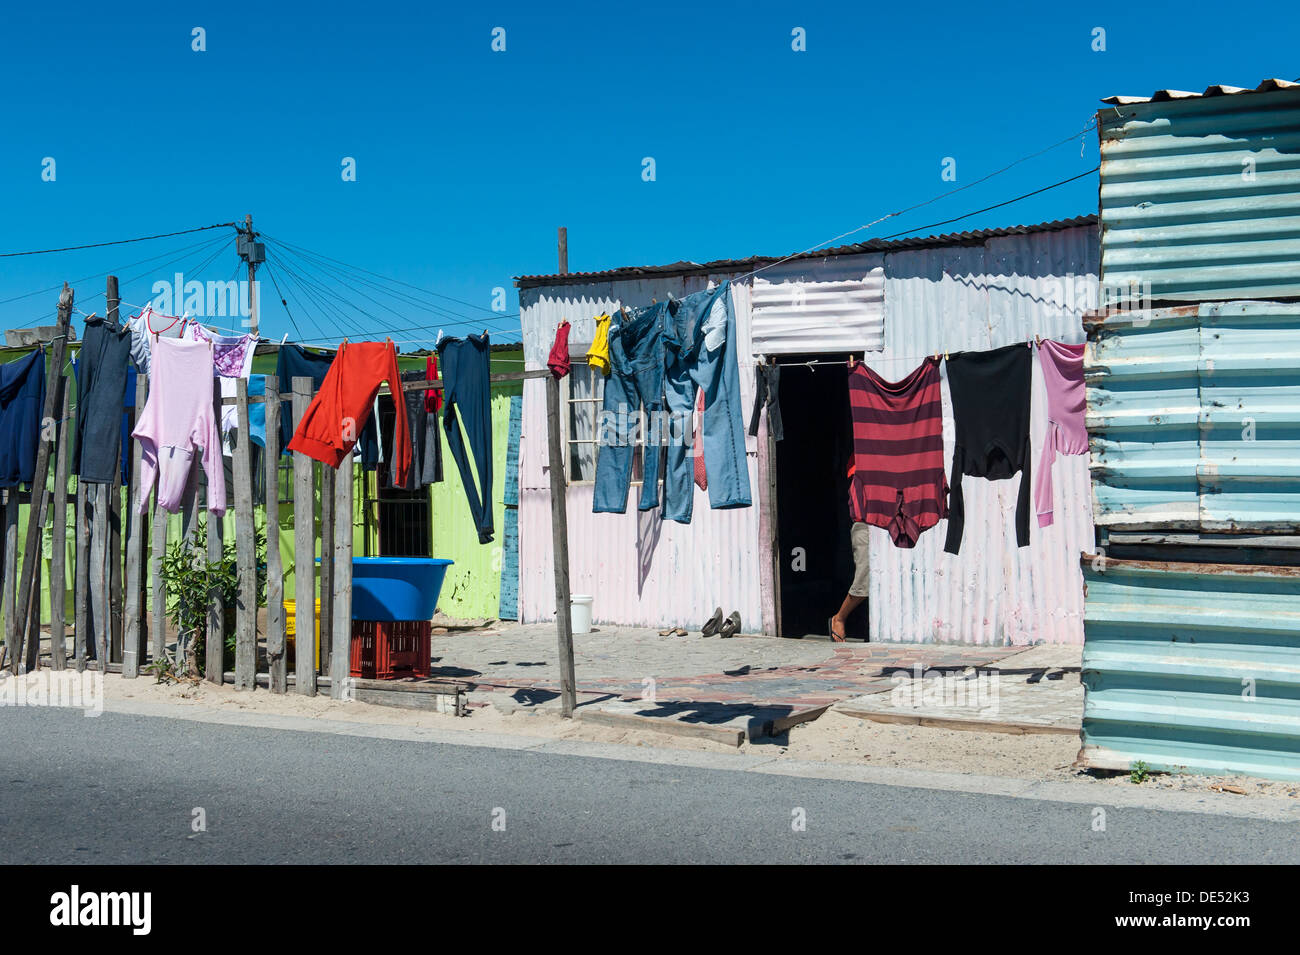 Laundry hanging in front of a tin shack in Khayelitsha, a partially informal township in Cape Town, South Africa Stock Photo